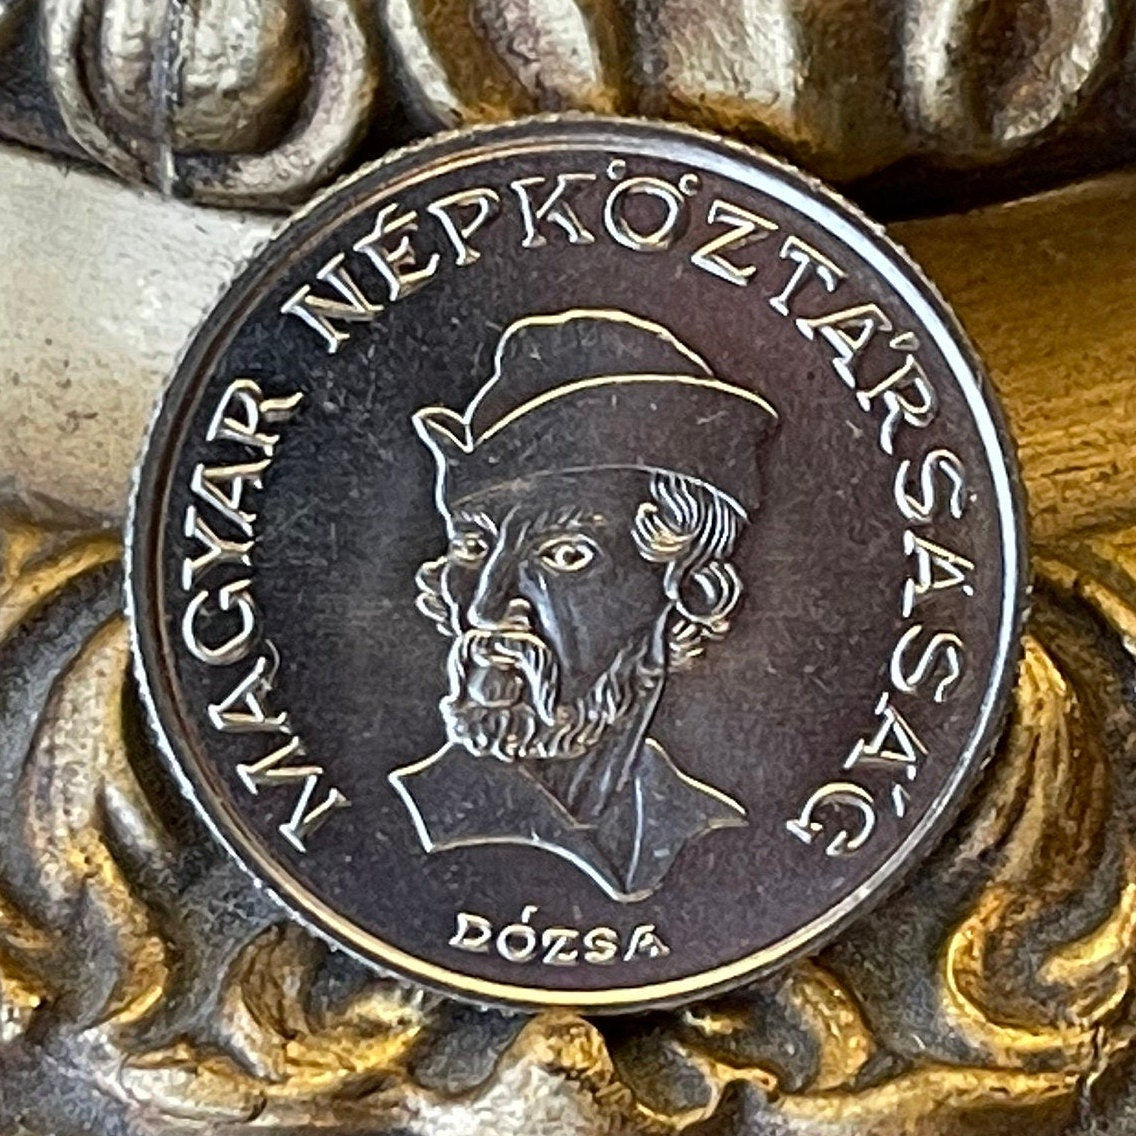 György Dózsa Freedom Martyr 20 Forint Hungary Authentic Coin Money for Jewelry (Peasant's Revolt) (Szekely) (Revolution) (Rebel)